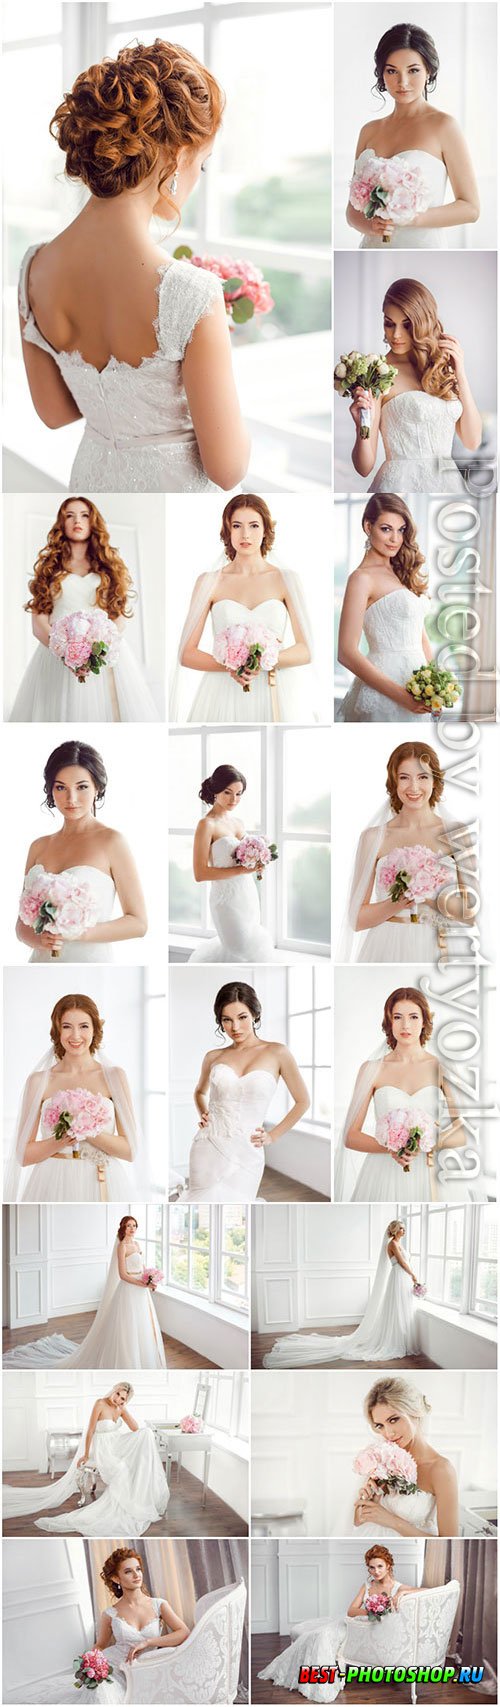 Lovely brides in luxurious dresses stock photo